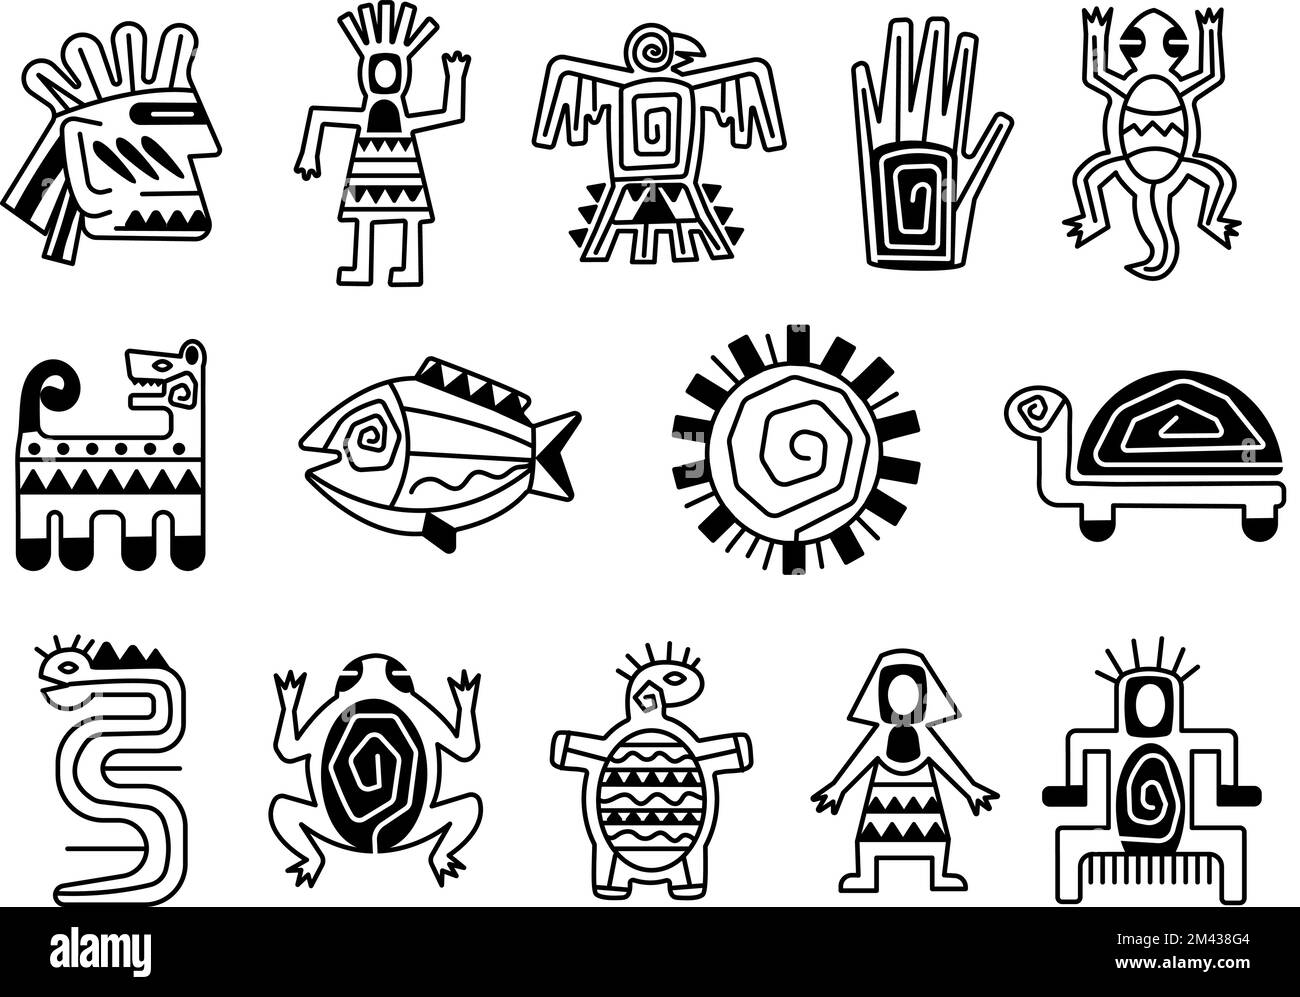 Mayan totem symbols, tattoo ethnic signs. Ornate aztec mythology, mexican indian or inca mythological tradition decent vector tribal elements Stock Vector